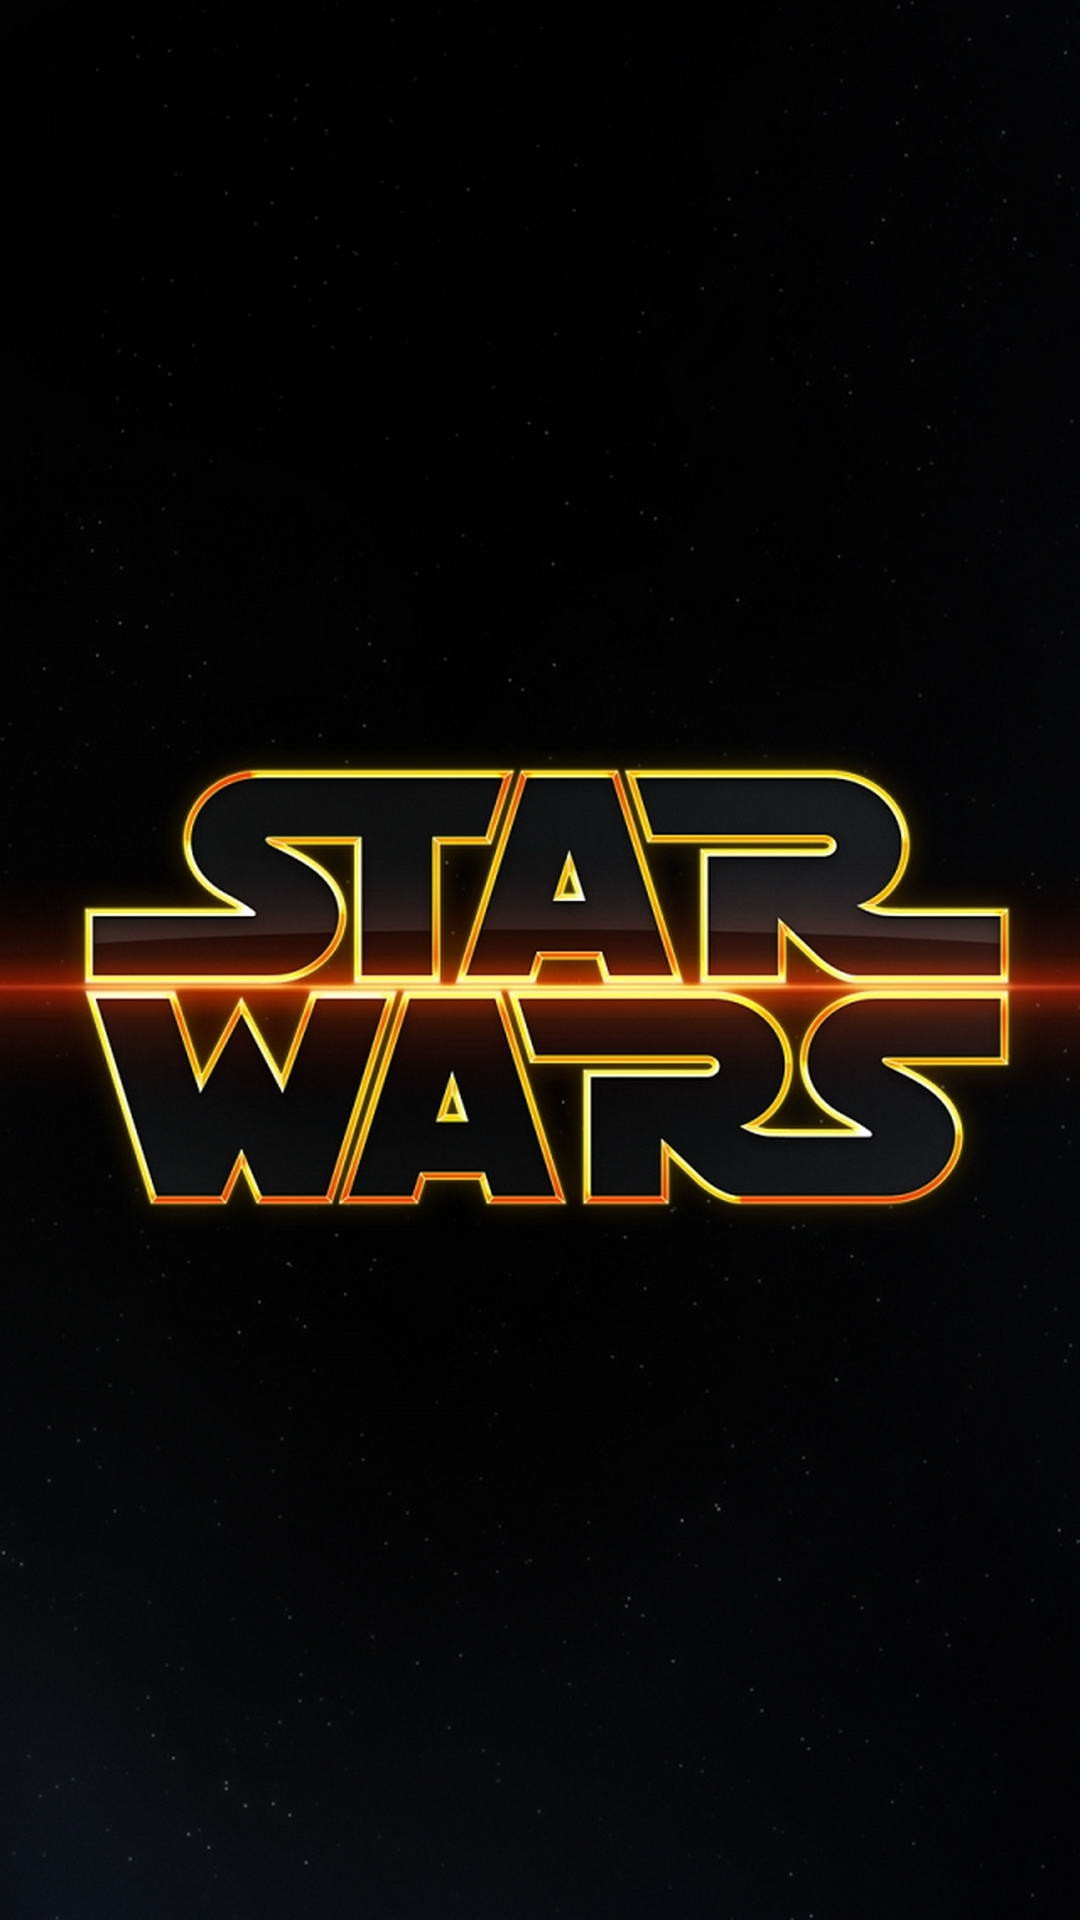 Star Wars Iphone 6 Wallpaper Images